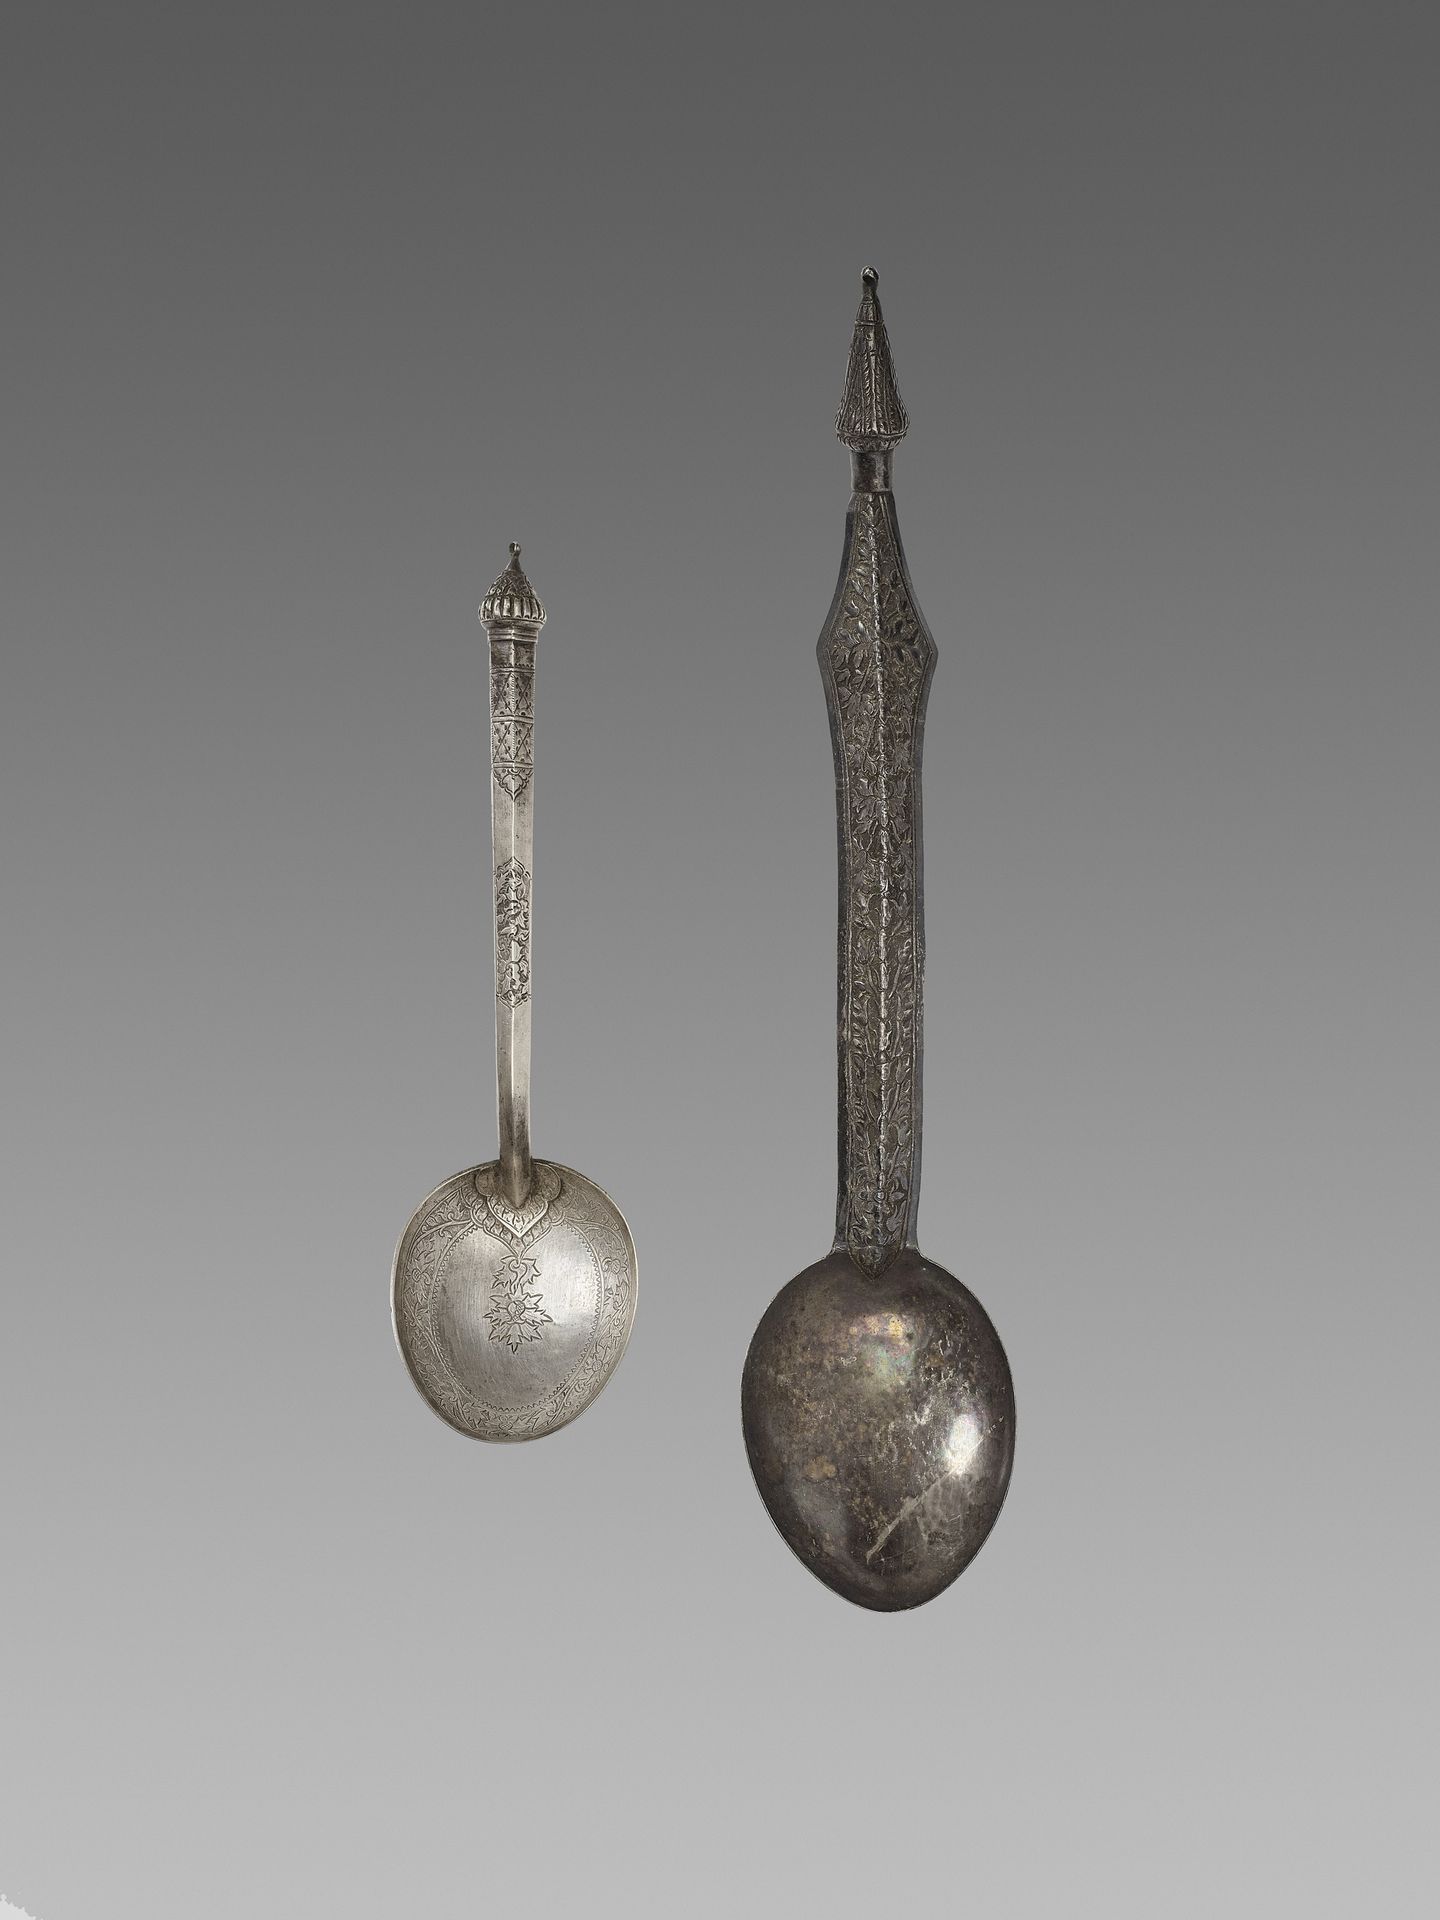 TWO LARGE CAMBODIAN SILVER SPOONS DUE GRANDI CUCCHIAI D'ARGENTO CAMBOGIANI
Cambo&hellip;